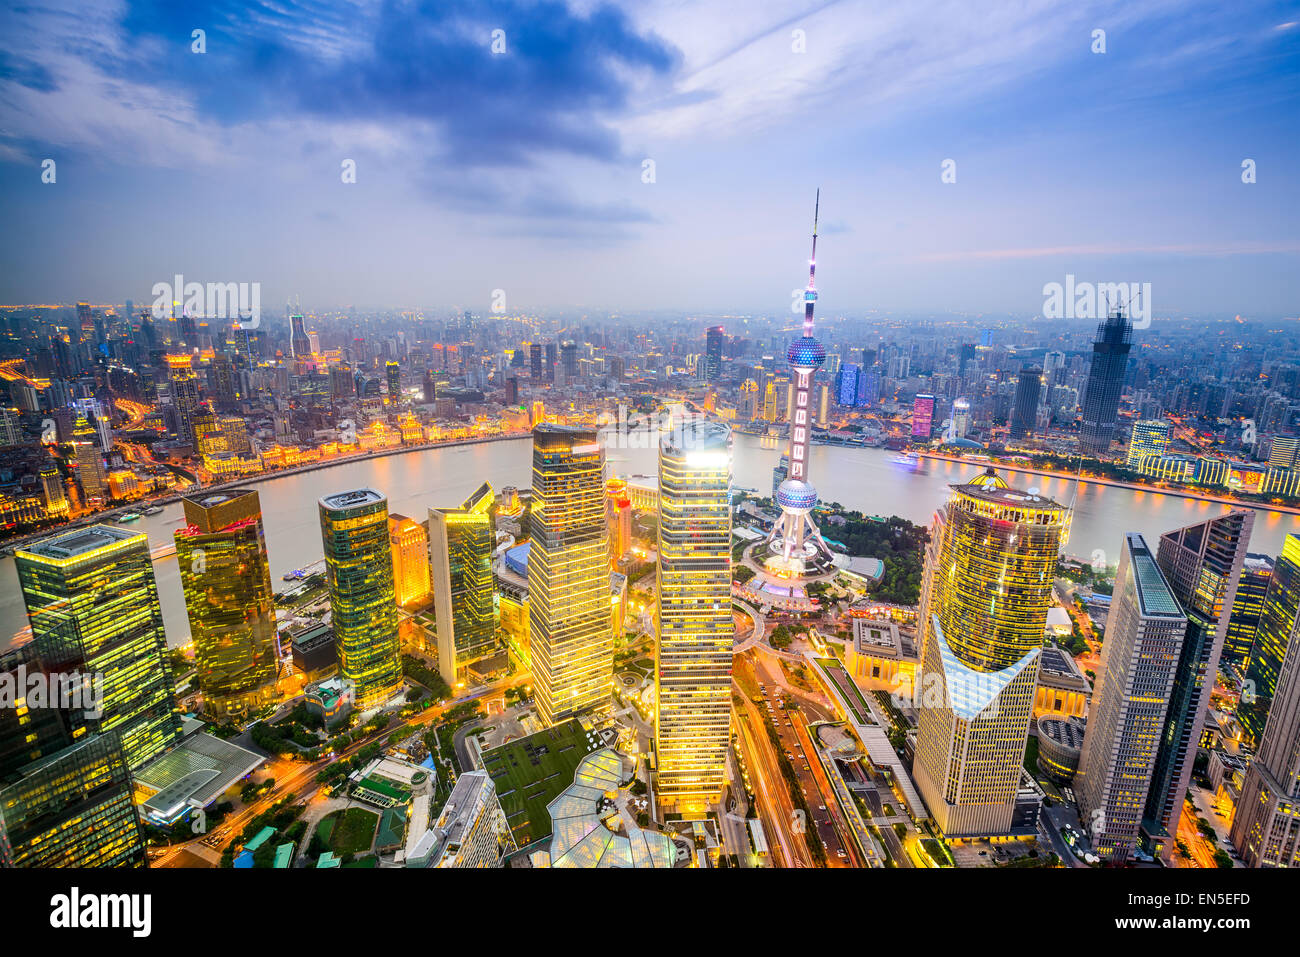 Shanghai, China city skyline over the Pudong Financial District. Stock Photo